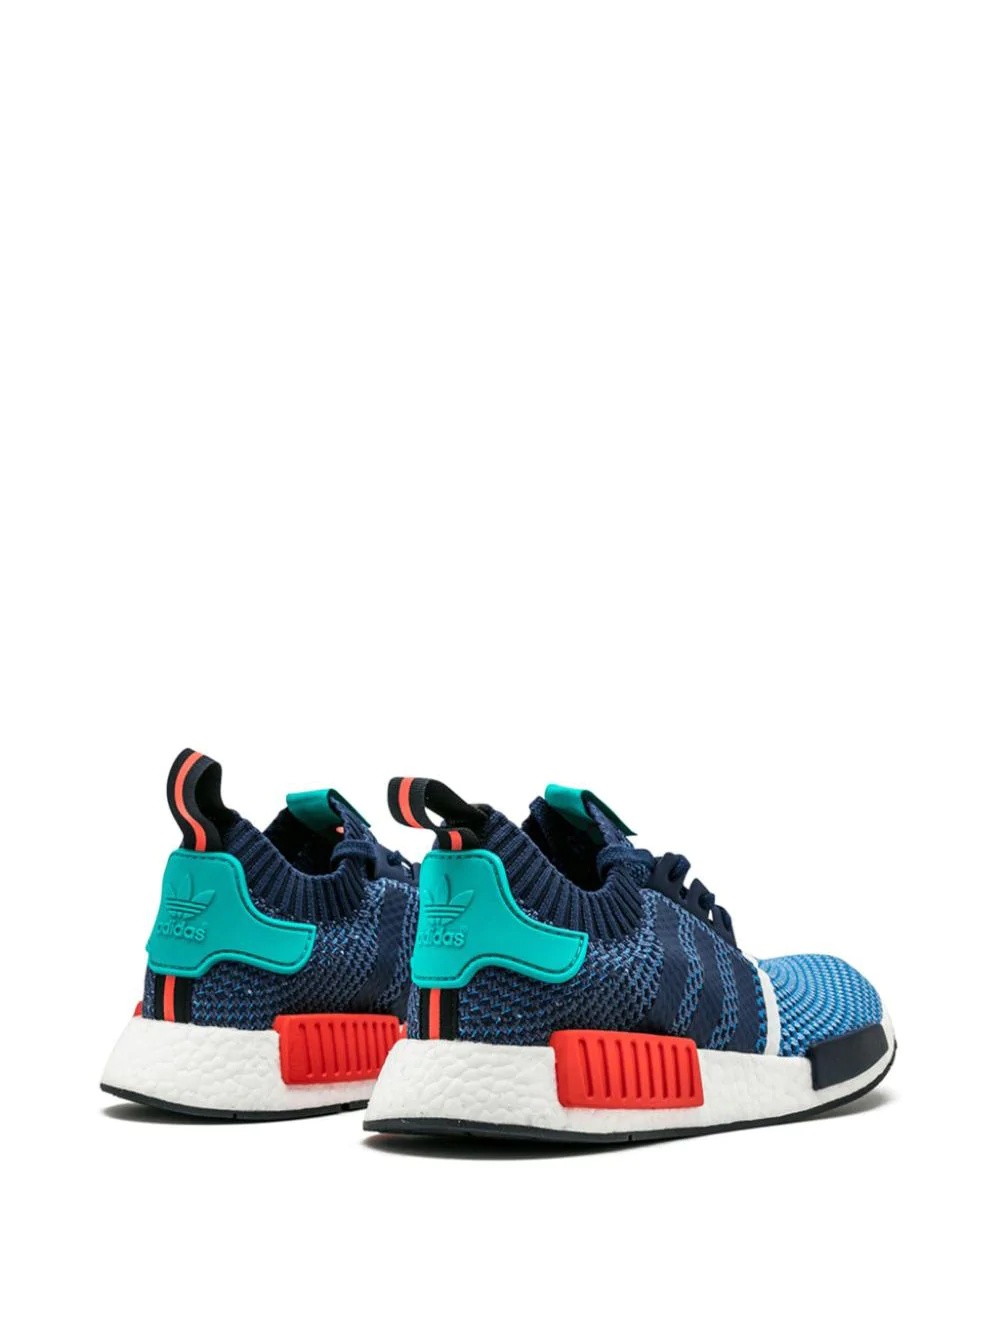 x Packer Shoes NMD R1 Primeknit trainers - 3